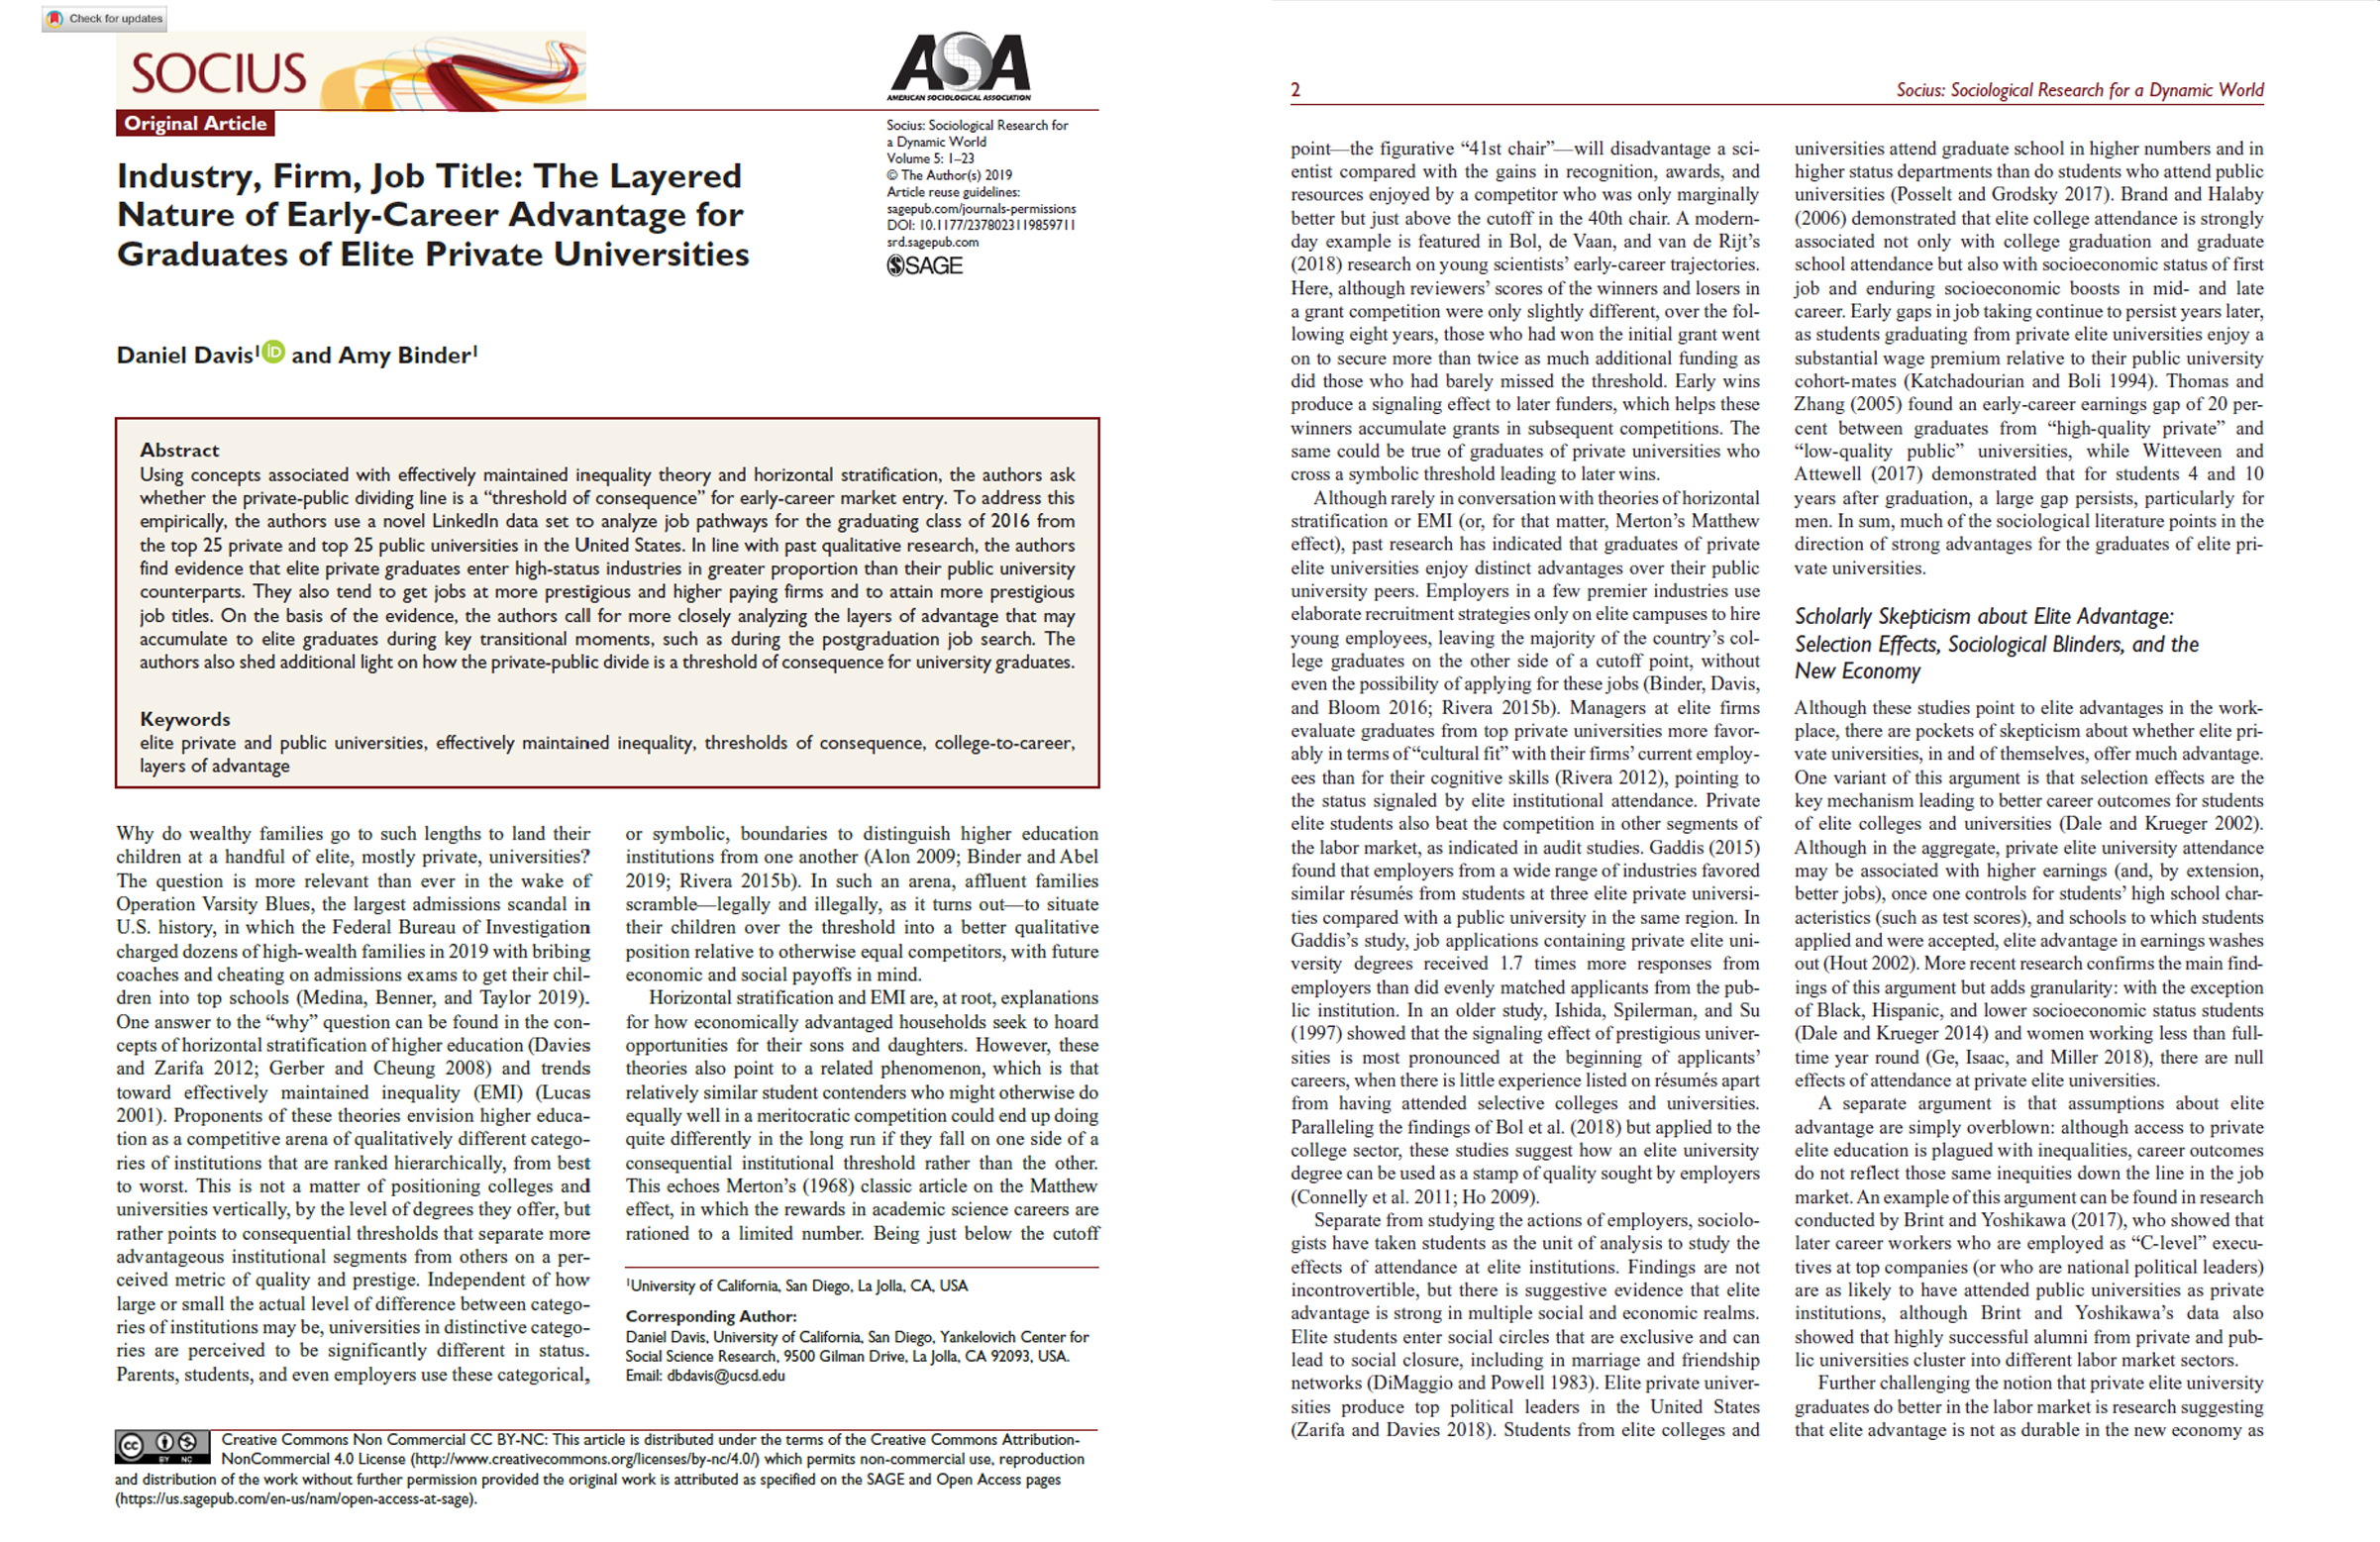 First two pages of the article “Industry, Firm, Job Title: The Layered Nature of Early-Career Advantage for Graduates of Elite Private Universities” (Davis and Binder 2019).